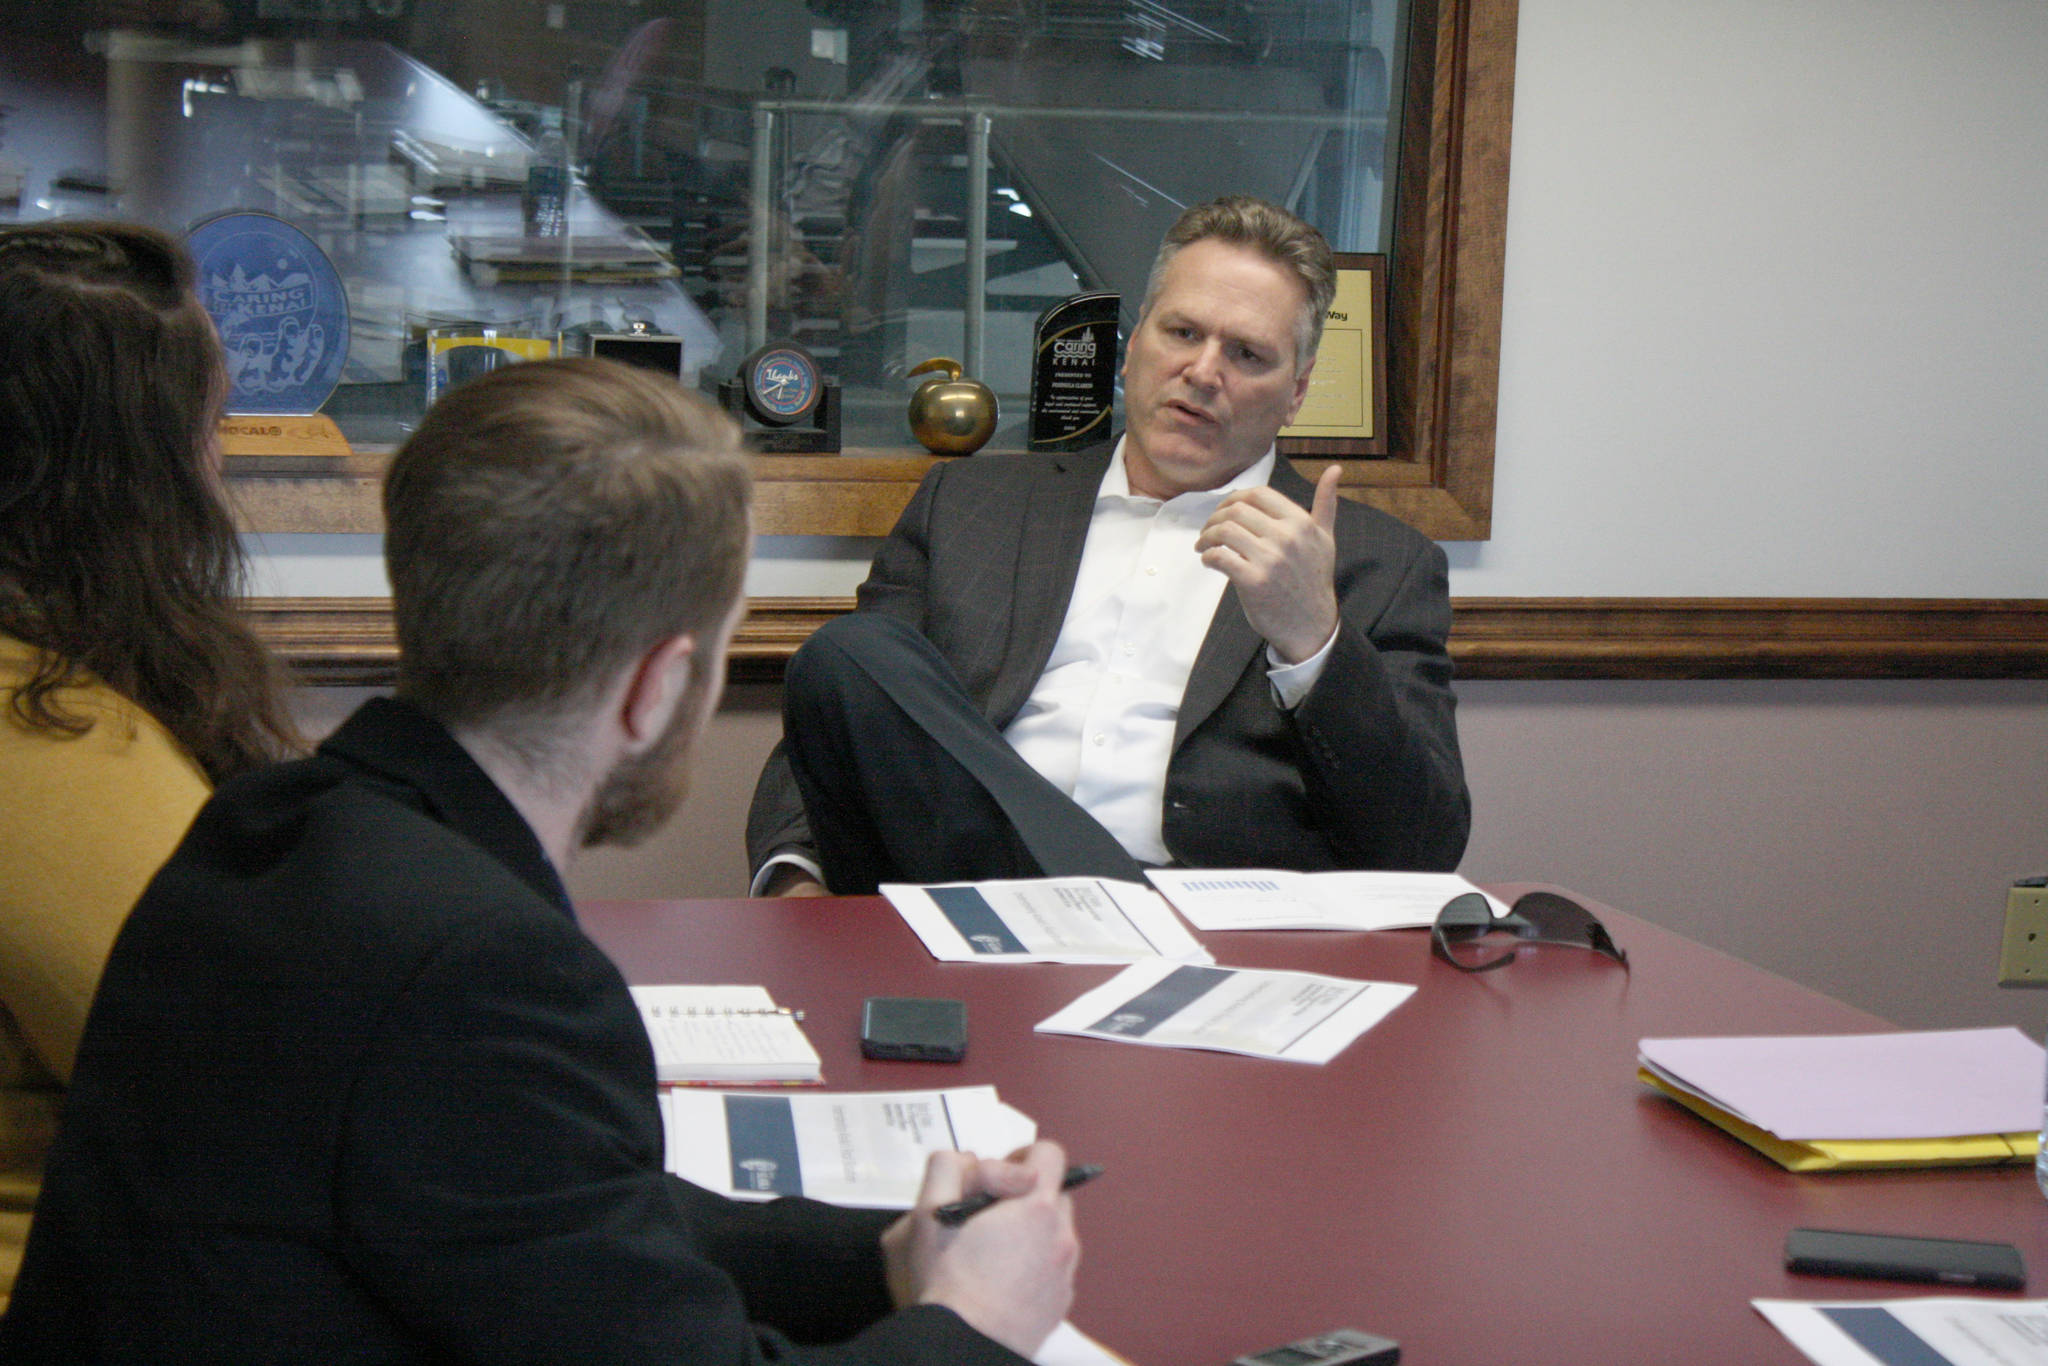 Gov. Mike Dunleavy speaks with Clarion reporters Brian Mazurek, left, and Victoria Petersen on Monday, March 25, 2019, in Kenai, Alaska. The governor answered questions on a wide range of topics, including public safety, education, industry and his proposed budget. (Photo by Erin Thompson/Peninsula Clarion)